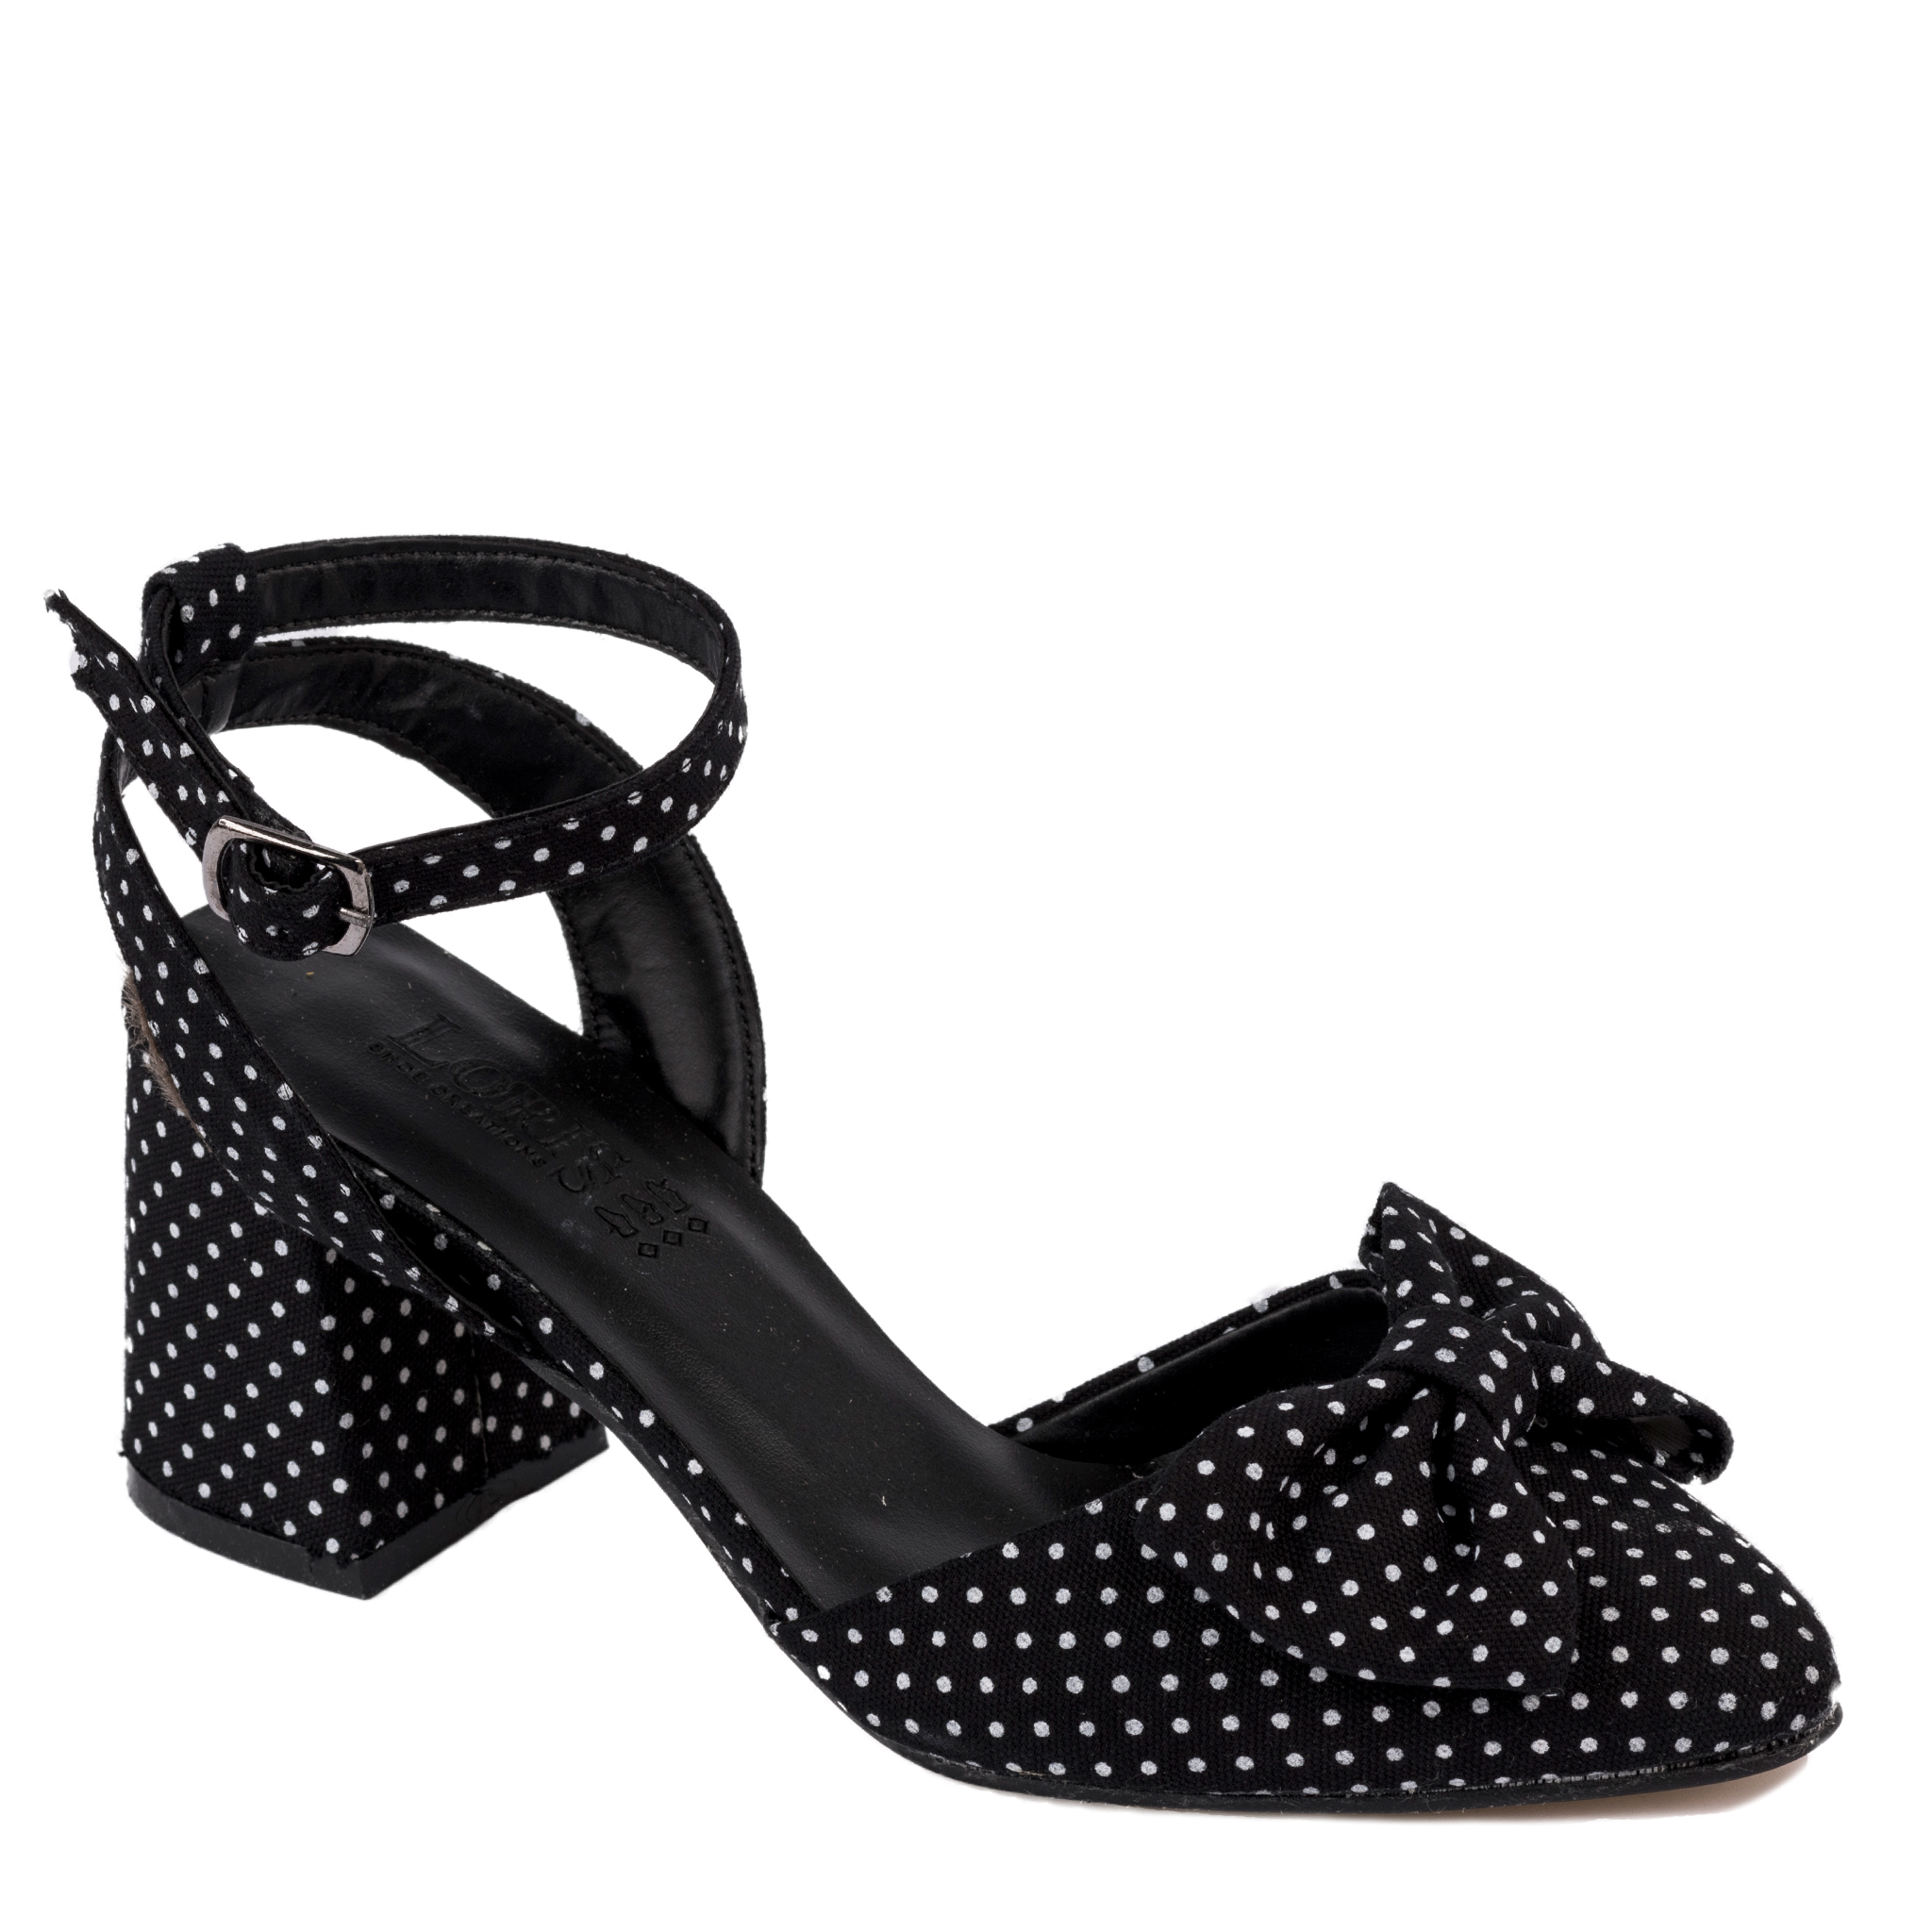 SANDALS WITH DOTS AND BOW - BLACK